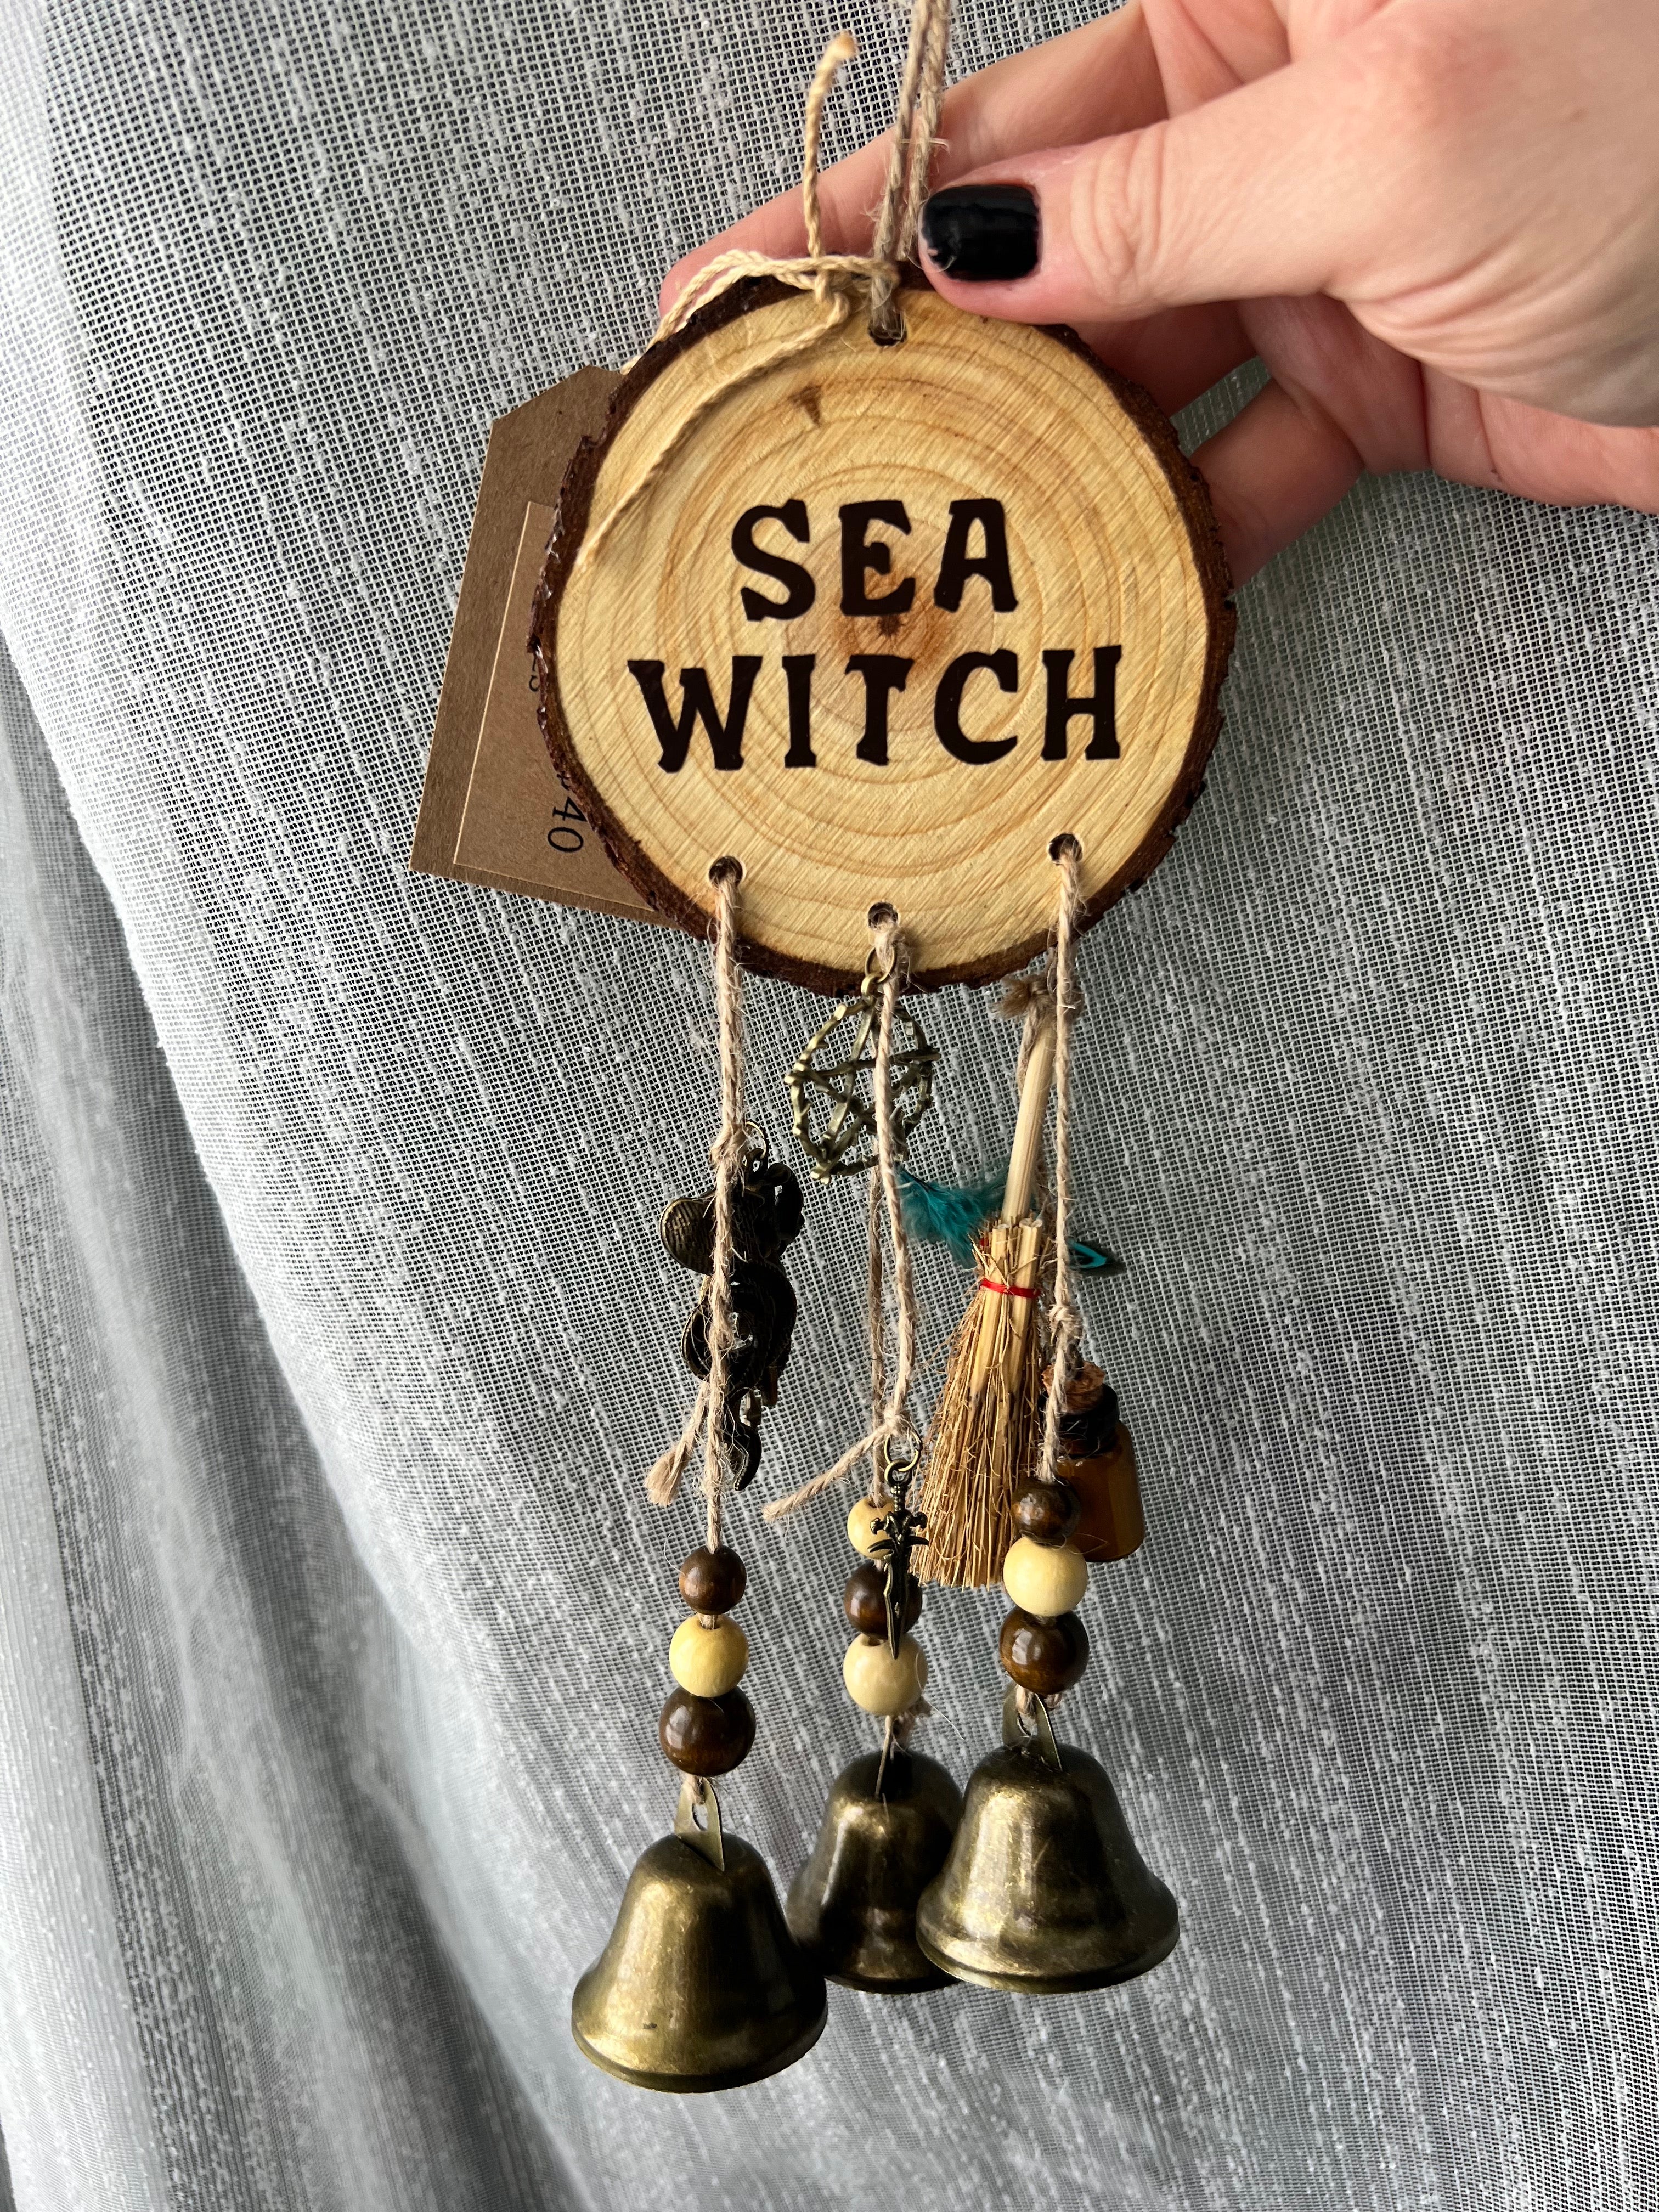 Handmade Witches Bells- Sea Witch